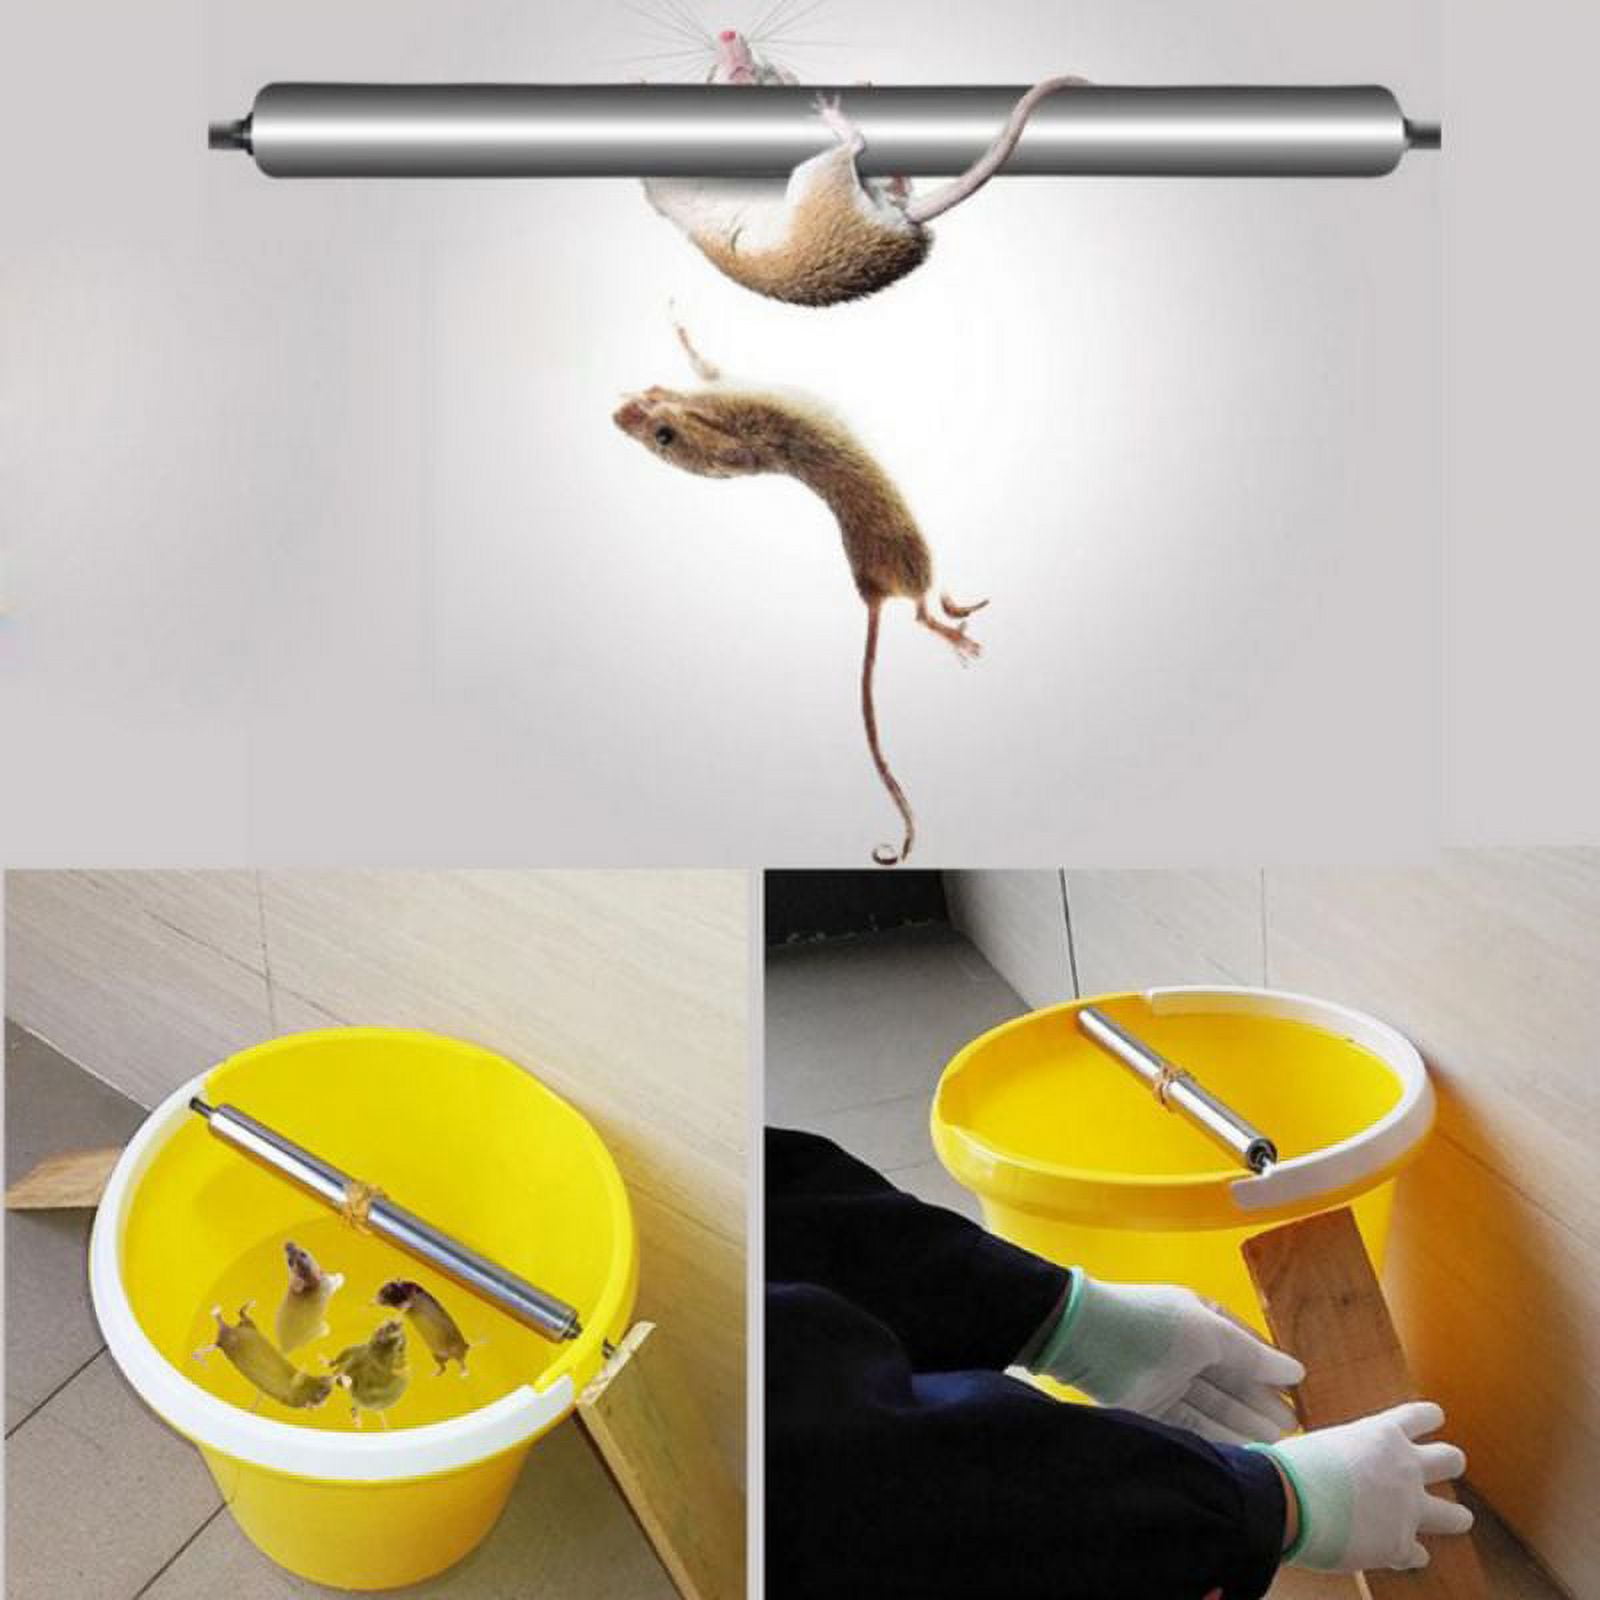 Camping World Kick The Bucket Mouse Trap - Including Odour Barrier/Filter and Ready to Use Barrel Roller, Catch Multiple Mice at One Time.